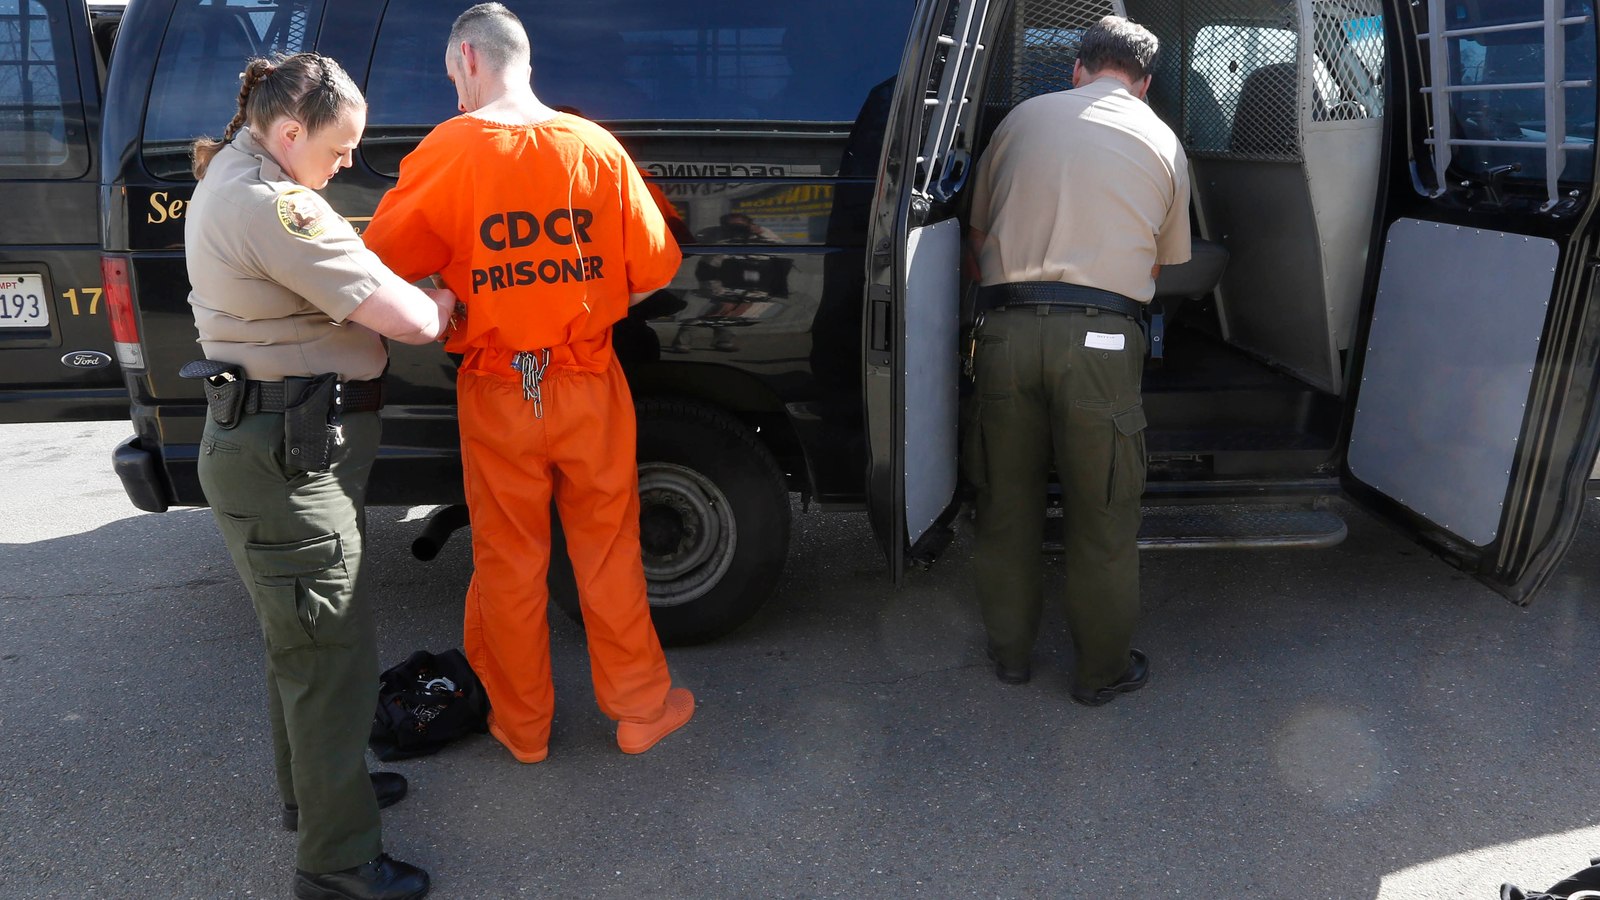 4 ways to minimize safety risks during inmate transport